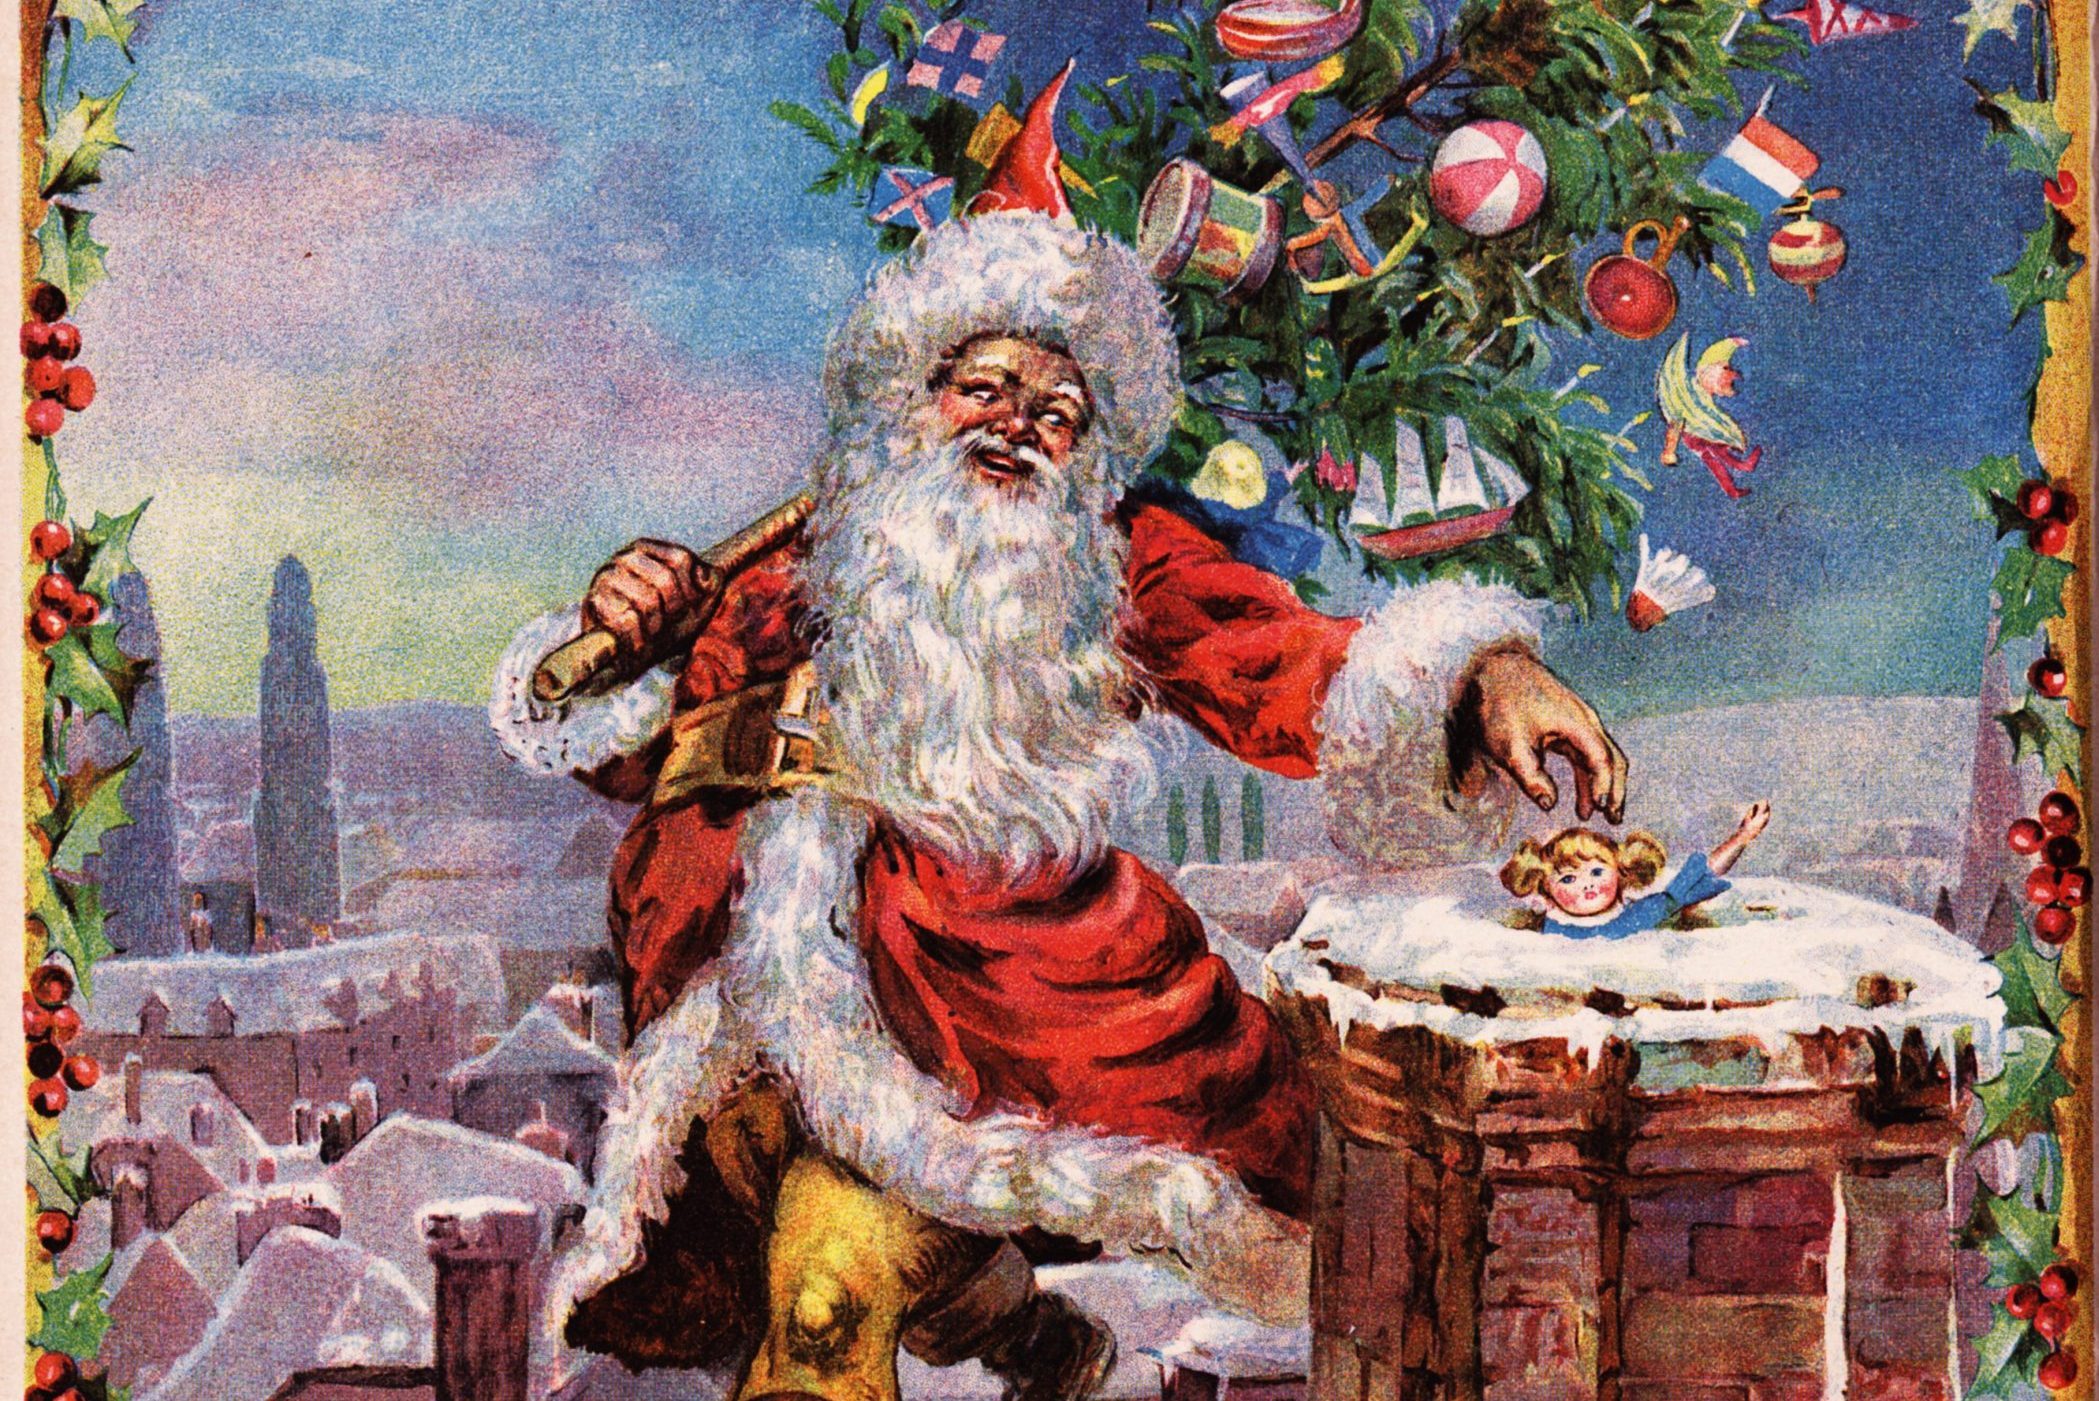 <p>Anyone asking "Is Santa real?" deserves a better understanding of how St. Nicholas transformed into the Americanized symbol we're familiar with today. Santa in America really came to life with the 1823 <a href="https://www.rd.com/list/christmas-poems/">Christmas poem</a> "A Visit from St. Nicholas," now commonly called "'Twas the Night Before Christmas," credited to the scholar and Irving's fellow New Yorker Clement Clarke Moore (although the true author is up for debate).</p> <p>"That poem reads much like today's Santa," Thompson says. It incorporates all the modern trappings of Santa: the rosy nose, the white beard, the fur outfit, the bundle of <a href="https://www.rd.com/list/gifts-for-kids/" rel="noopener noreferrer">gifts for kids</a>, even his reindeer's names (the reindeer themselves first appeared two years earlier in the poem "Old Santeclaus with Much Delight"). "A Visit" builds on Irving's vision, even borrowing the pipe and the near-direct quote, "laying his finger aside of his nose."</p> <p>Visually, artists began incorporating this jolly, round-bellied Santa into illustrations. Civil War cartoonist Thomas Nast drew one of the first recognizable Santas in 1862 in <em>Harper's Weekly</em> and continued for more than 20 years. "Thomas Nast, over the course of many years, is developing Santa and plumping up his physique," Thompson says.</p> <p>He says Santa was a perfect figure for the Industrial Revolution of the 19th century, which brought about an increase in commerce—and the commercialization of Christmas. "The whole birth of modern consumer culture that very much starts in the 19th century helped motivate the invention of Santa Claus, the American version," Thompson says. "If Santa Claus comes from a saint, it makes it a little bit more sacred; this is not simply retail or consumer-driven. This is not simply a god of consumption."</p>